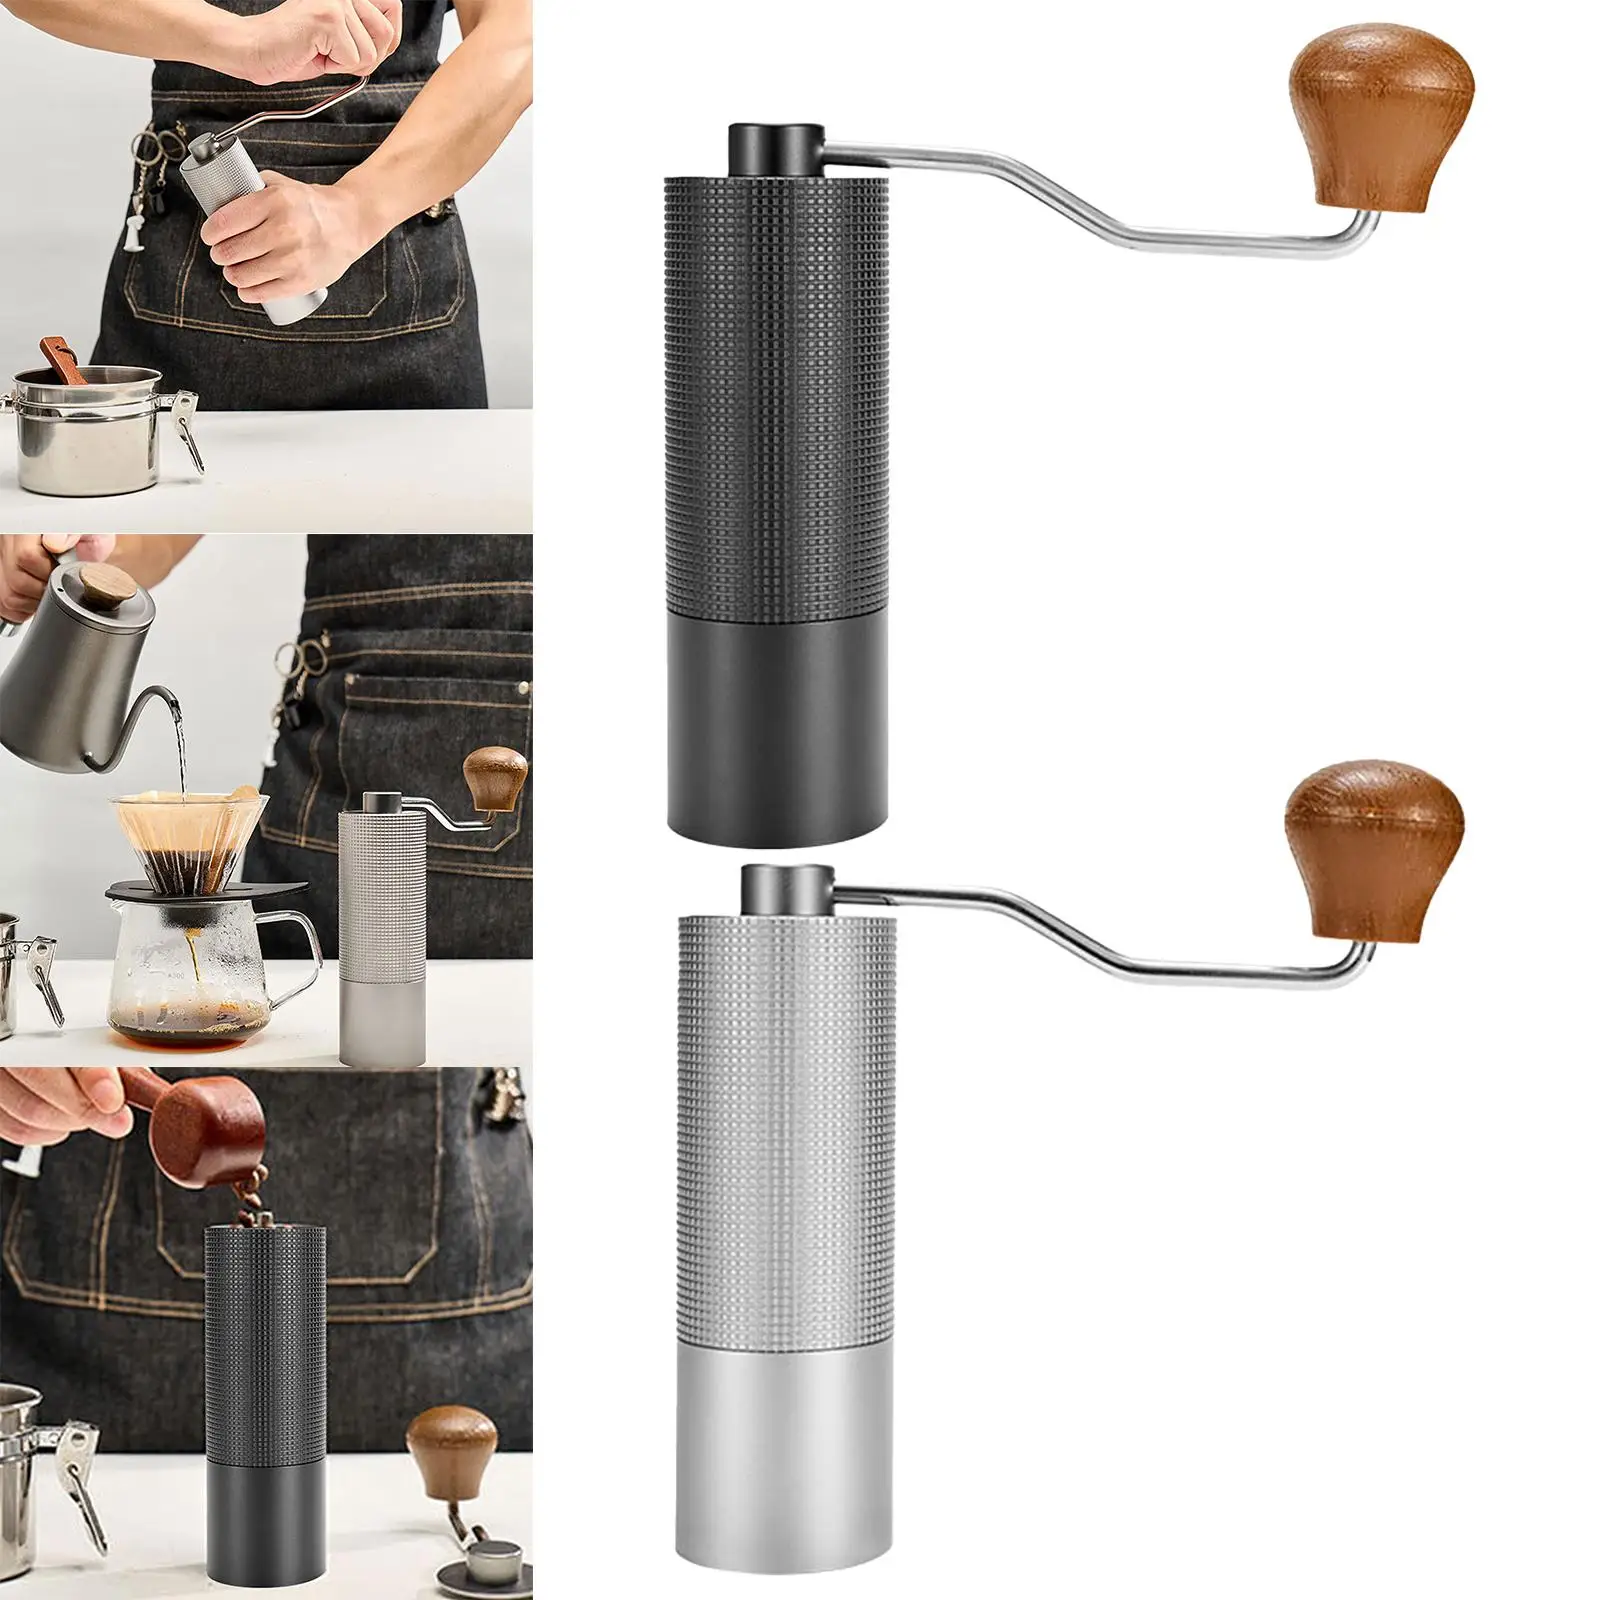 Manual Manual Coffee Grinder Adjustable Knob Grain Mill Fine Grind Coffee Beans Hand Grinder for Household Kitchen